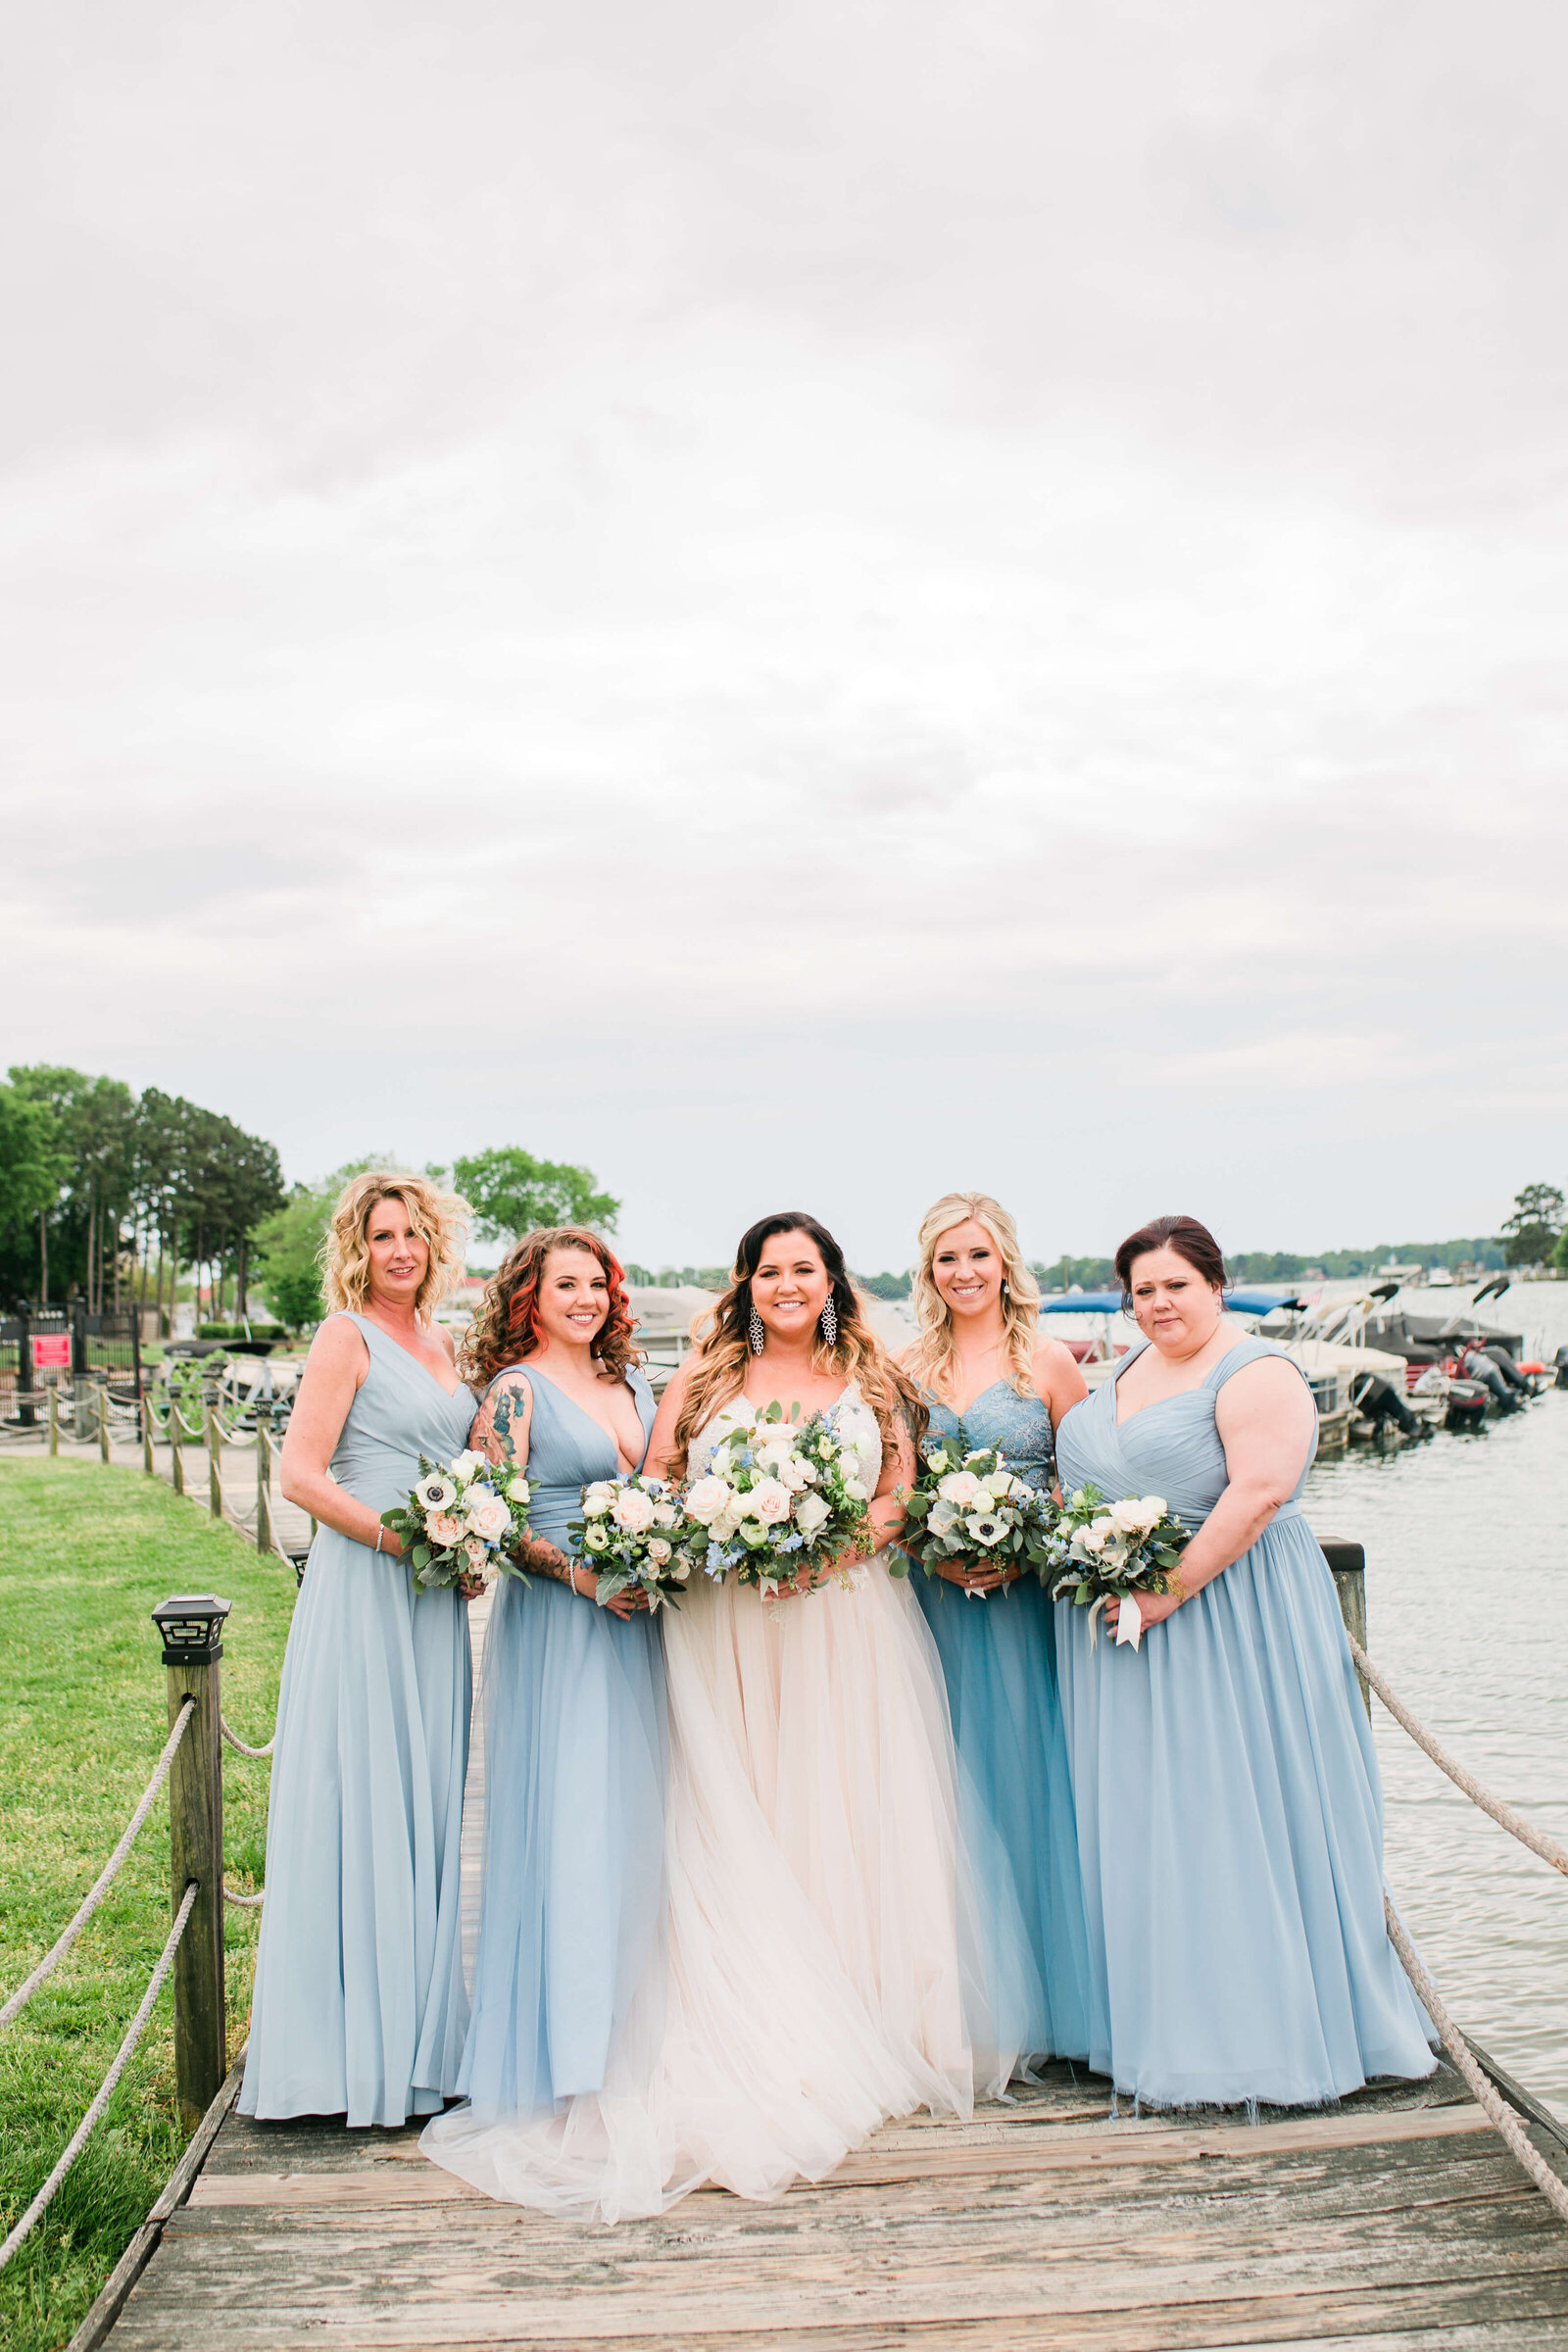 Virginia-Beach-Wedding-Planners-Sincerely-Jane-Events-7412A